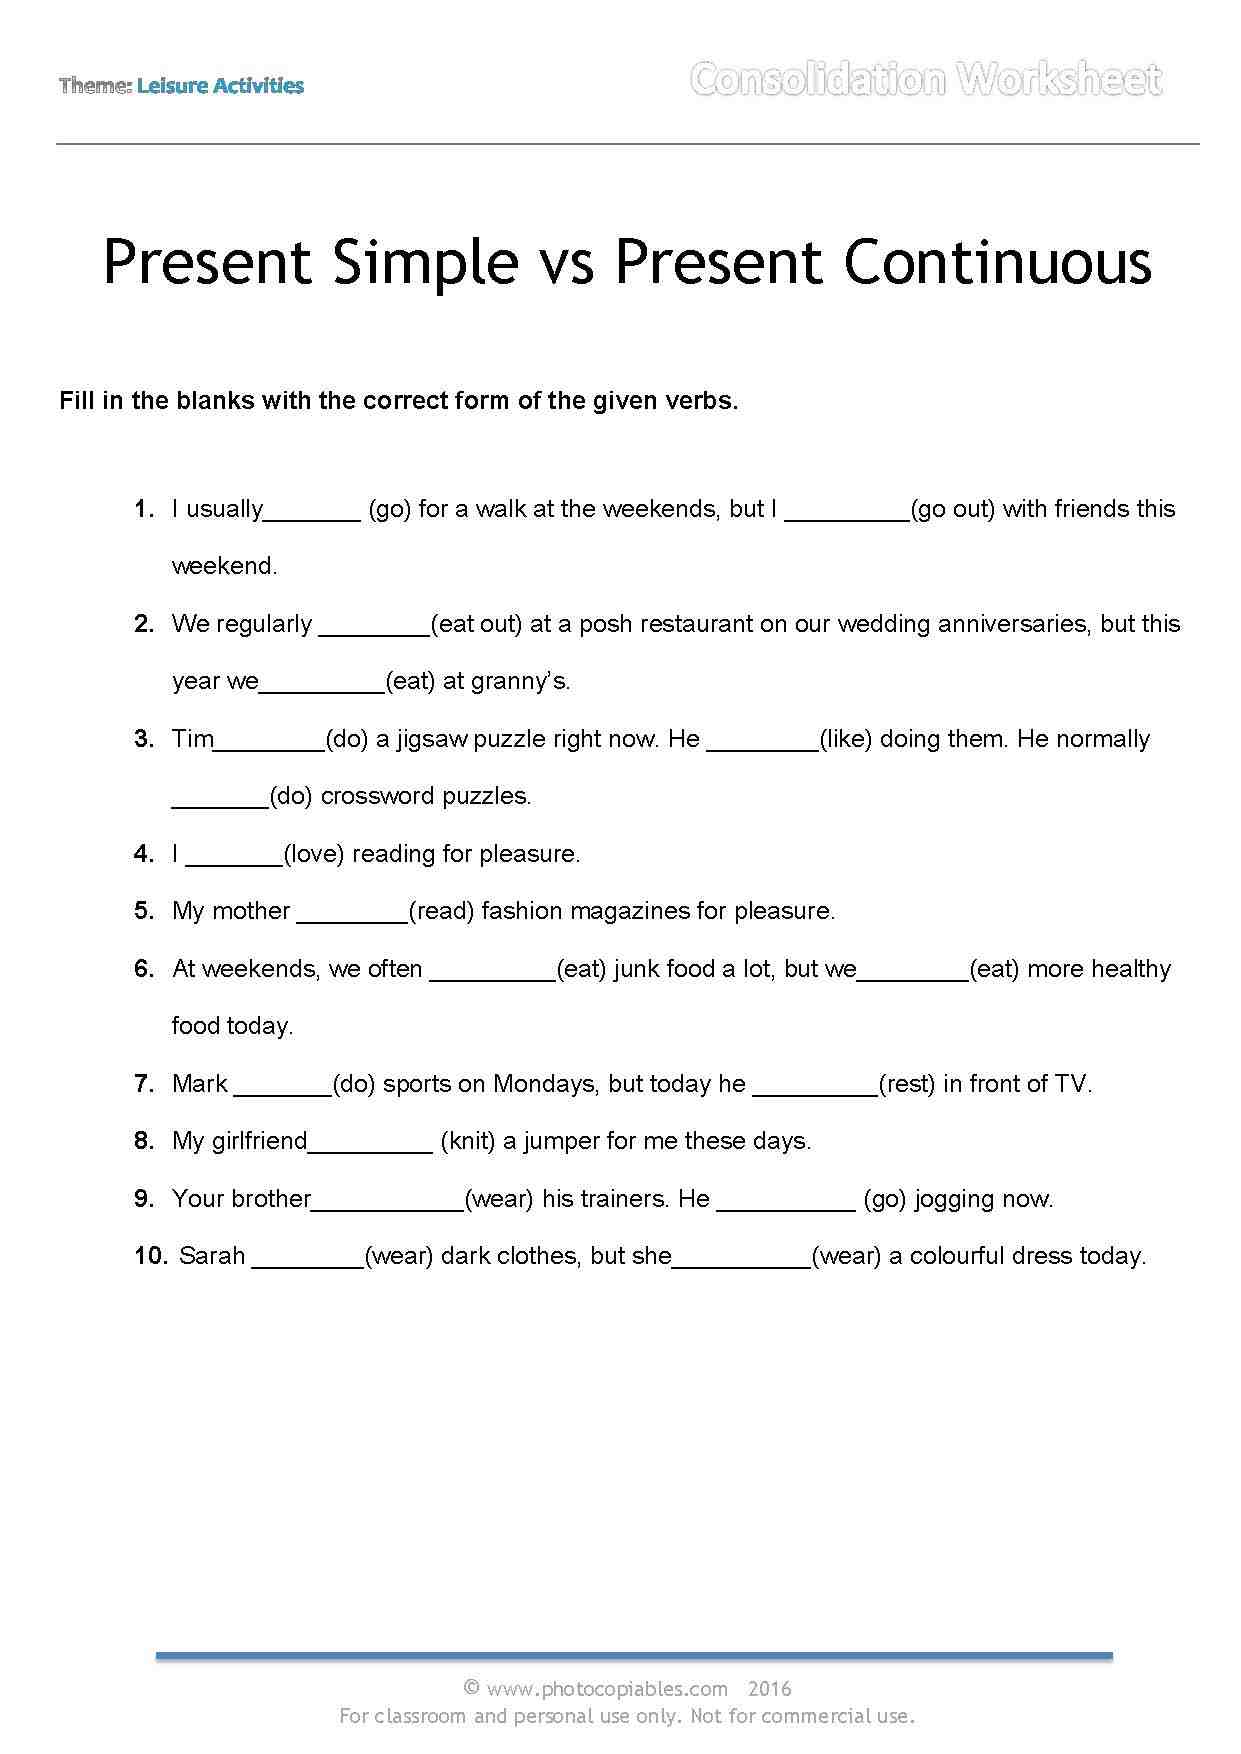 Present simple and present continuous worksheet. Present simple vs present Continuous. Present simple vs present Continuous упражнения. Present simple present Continuous Worksheets. Present simple or present Continuous exercises.